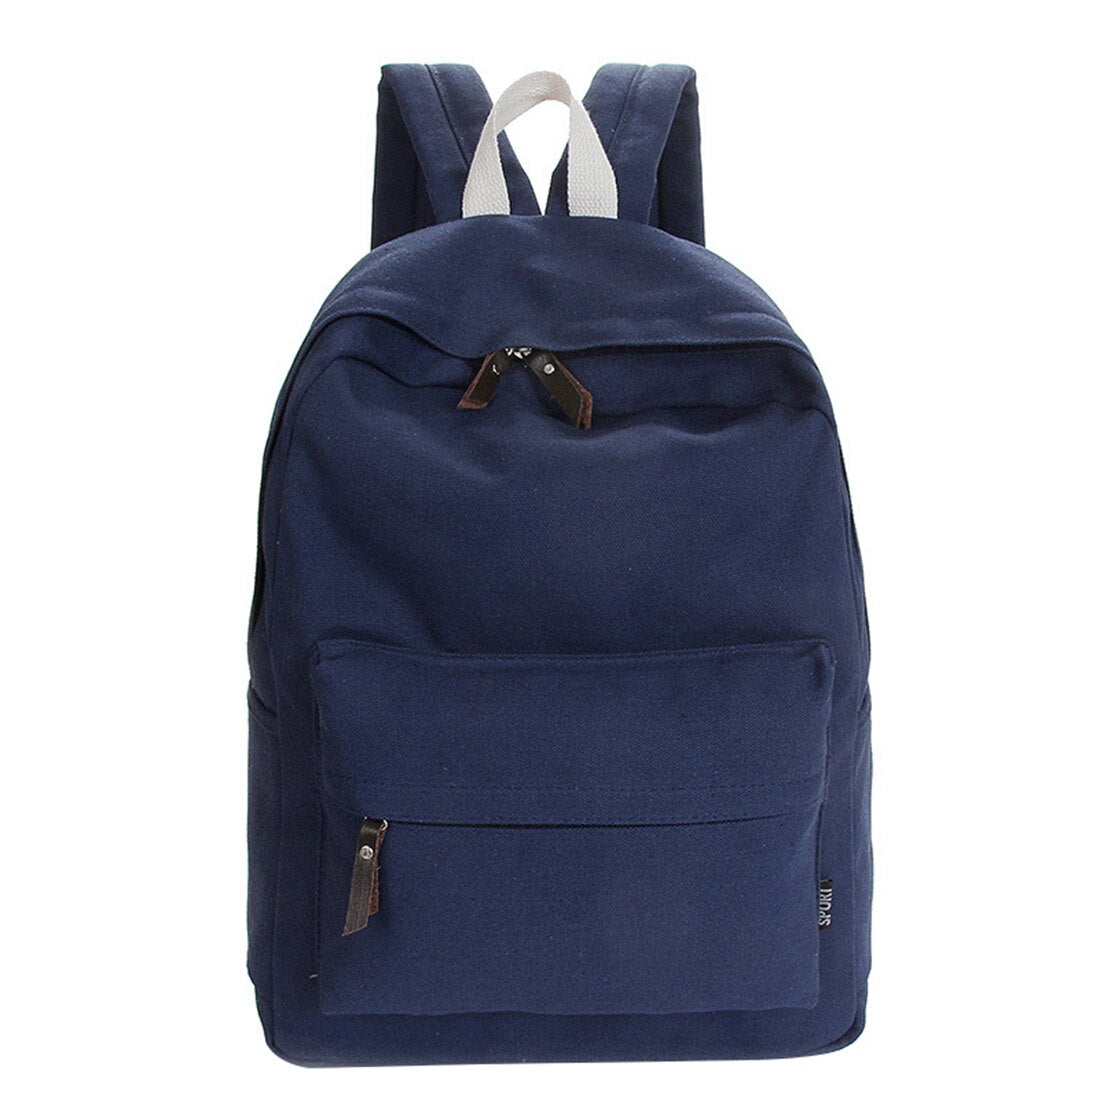 New Casual Canvas Backpack Fashion school bag for girls and boys unisex backpack shoulder bag - ebowsos